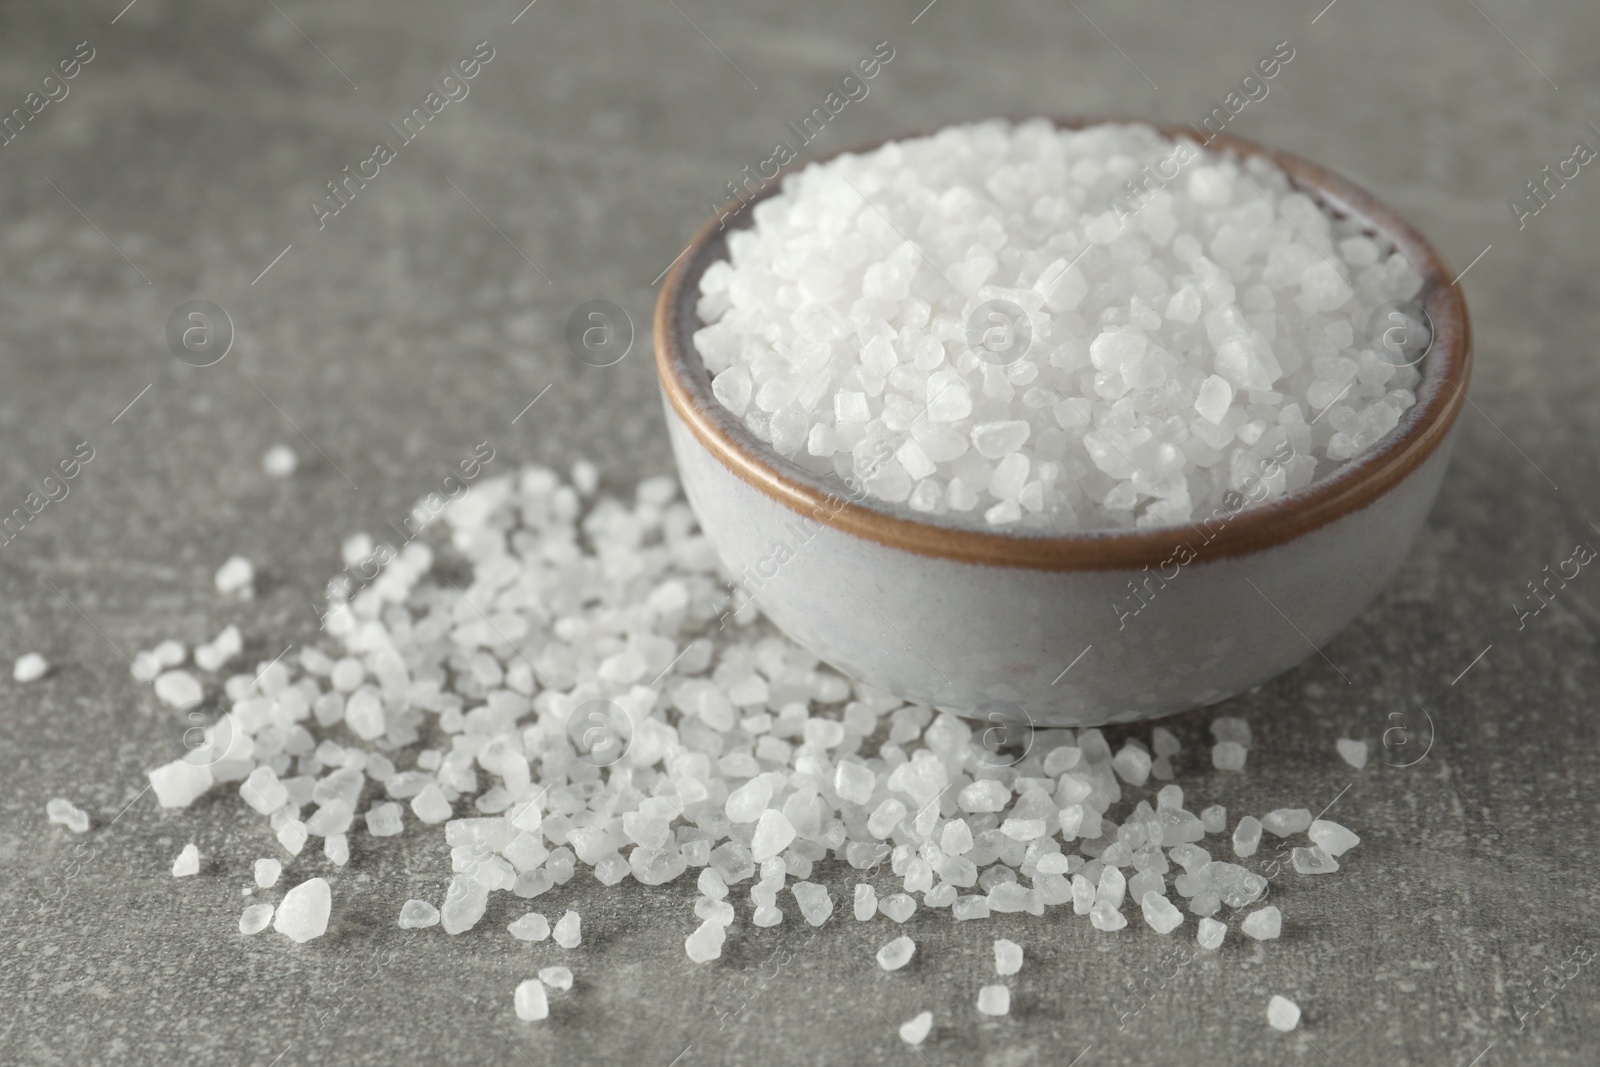 Photo of Bowl of natural sea salt on grey table